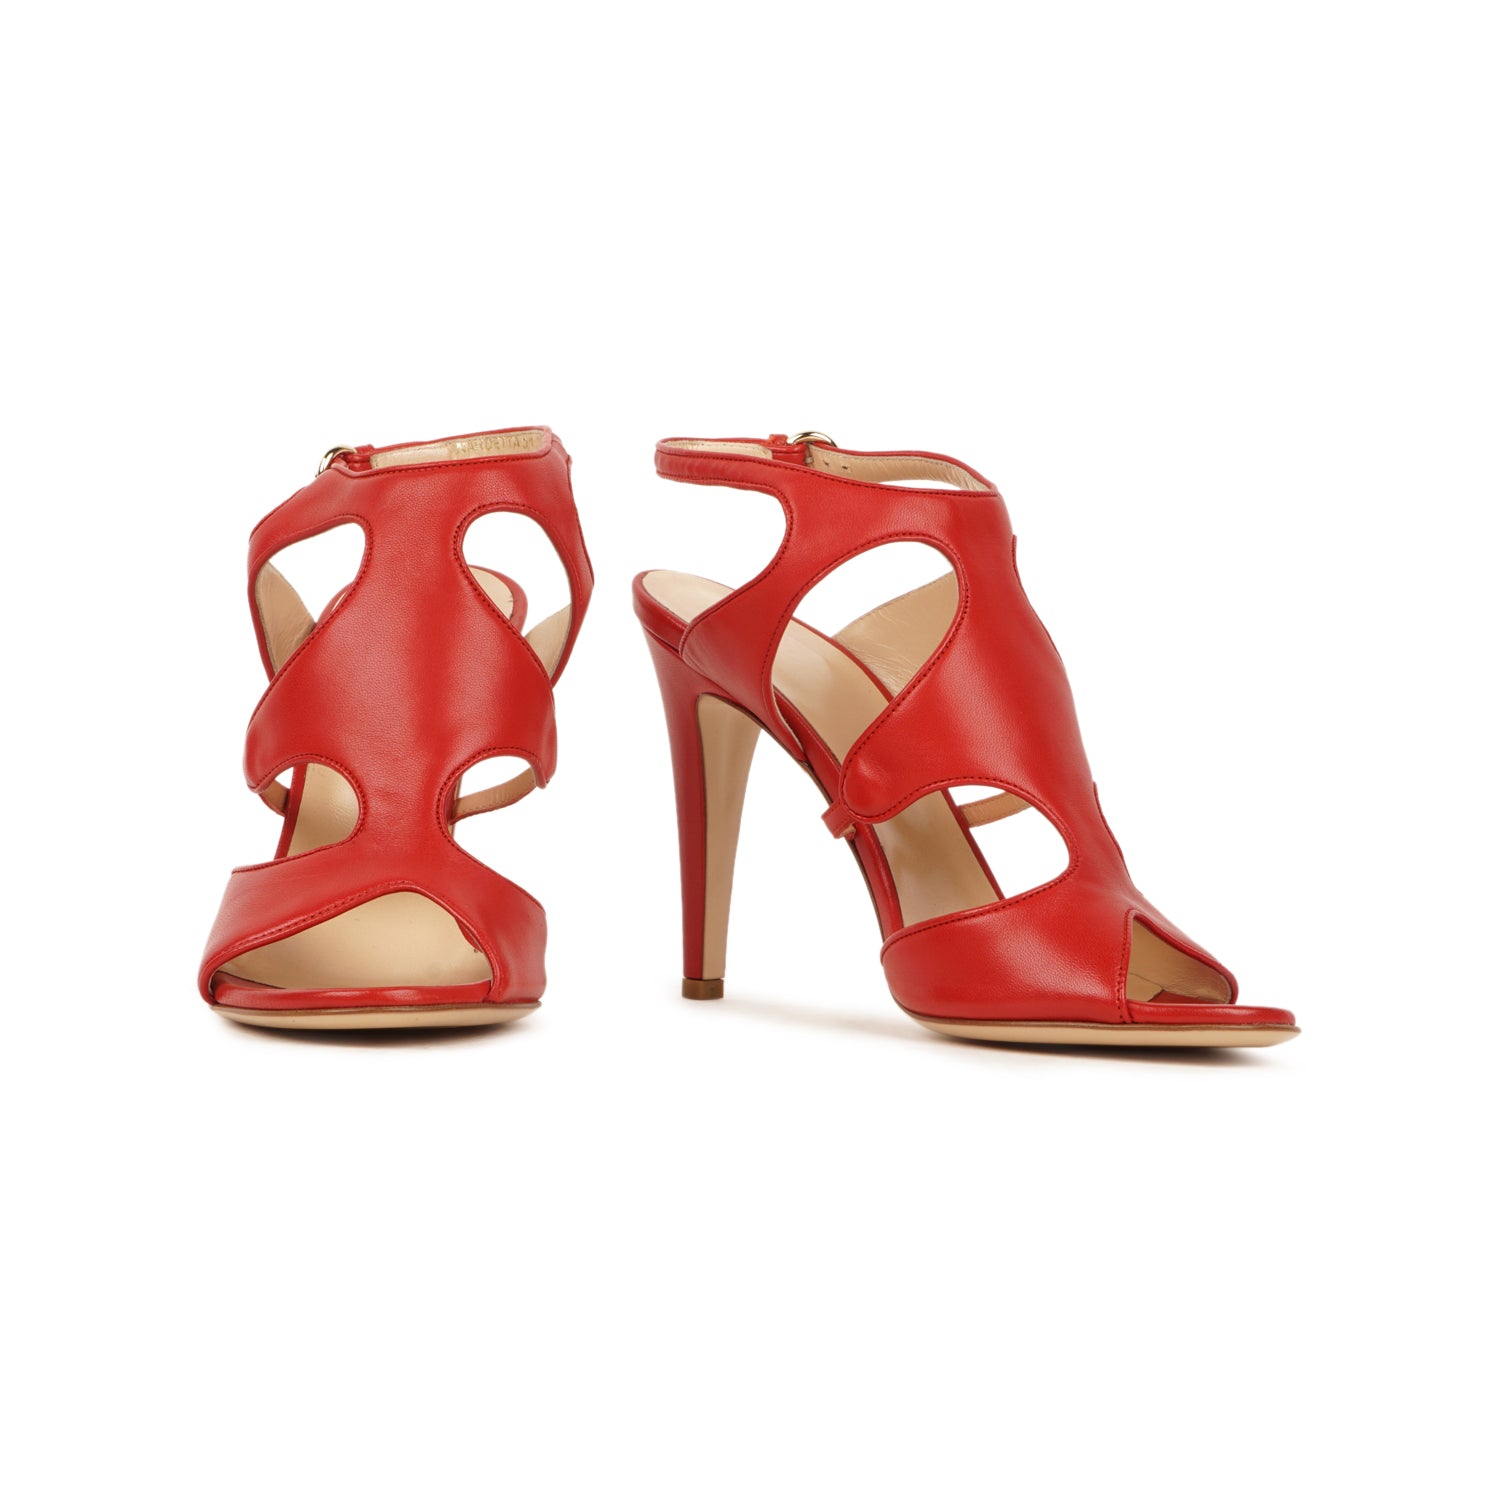 BALLY RED PUMPS